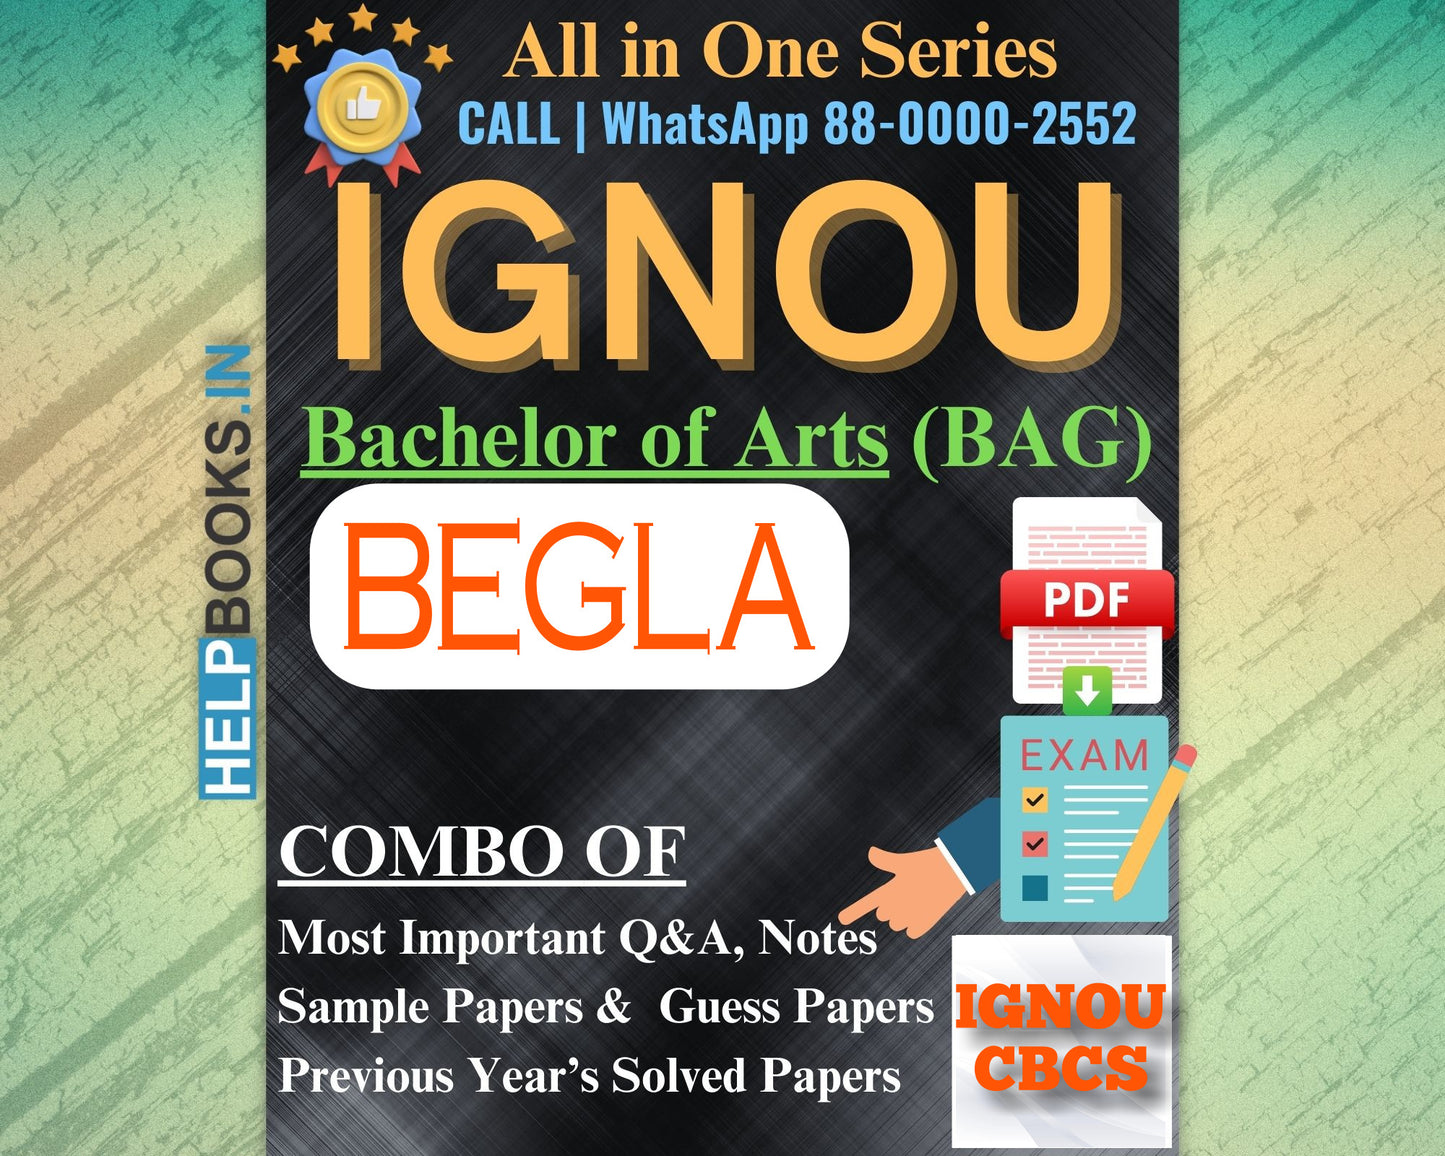 IGNOU BAG Online Study Package: Bachelor of Arts (BA) - Previous Year’s Solved Papers, Q&A, Exam Notes, Sample Papers, Guess Papers-BEGLA135, BEGLA136, BEGLA137, BEGLA138